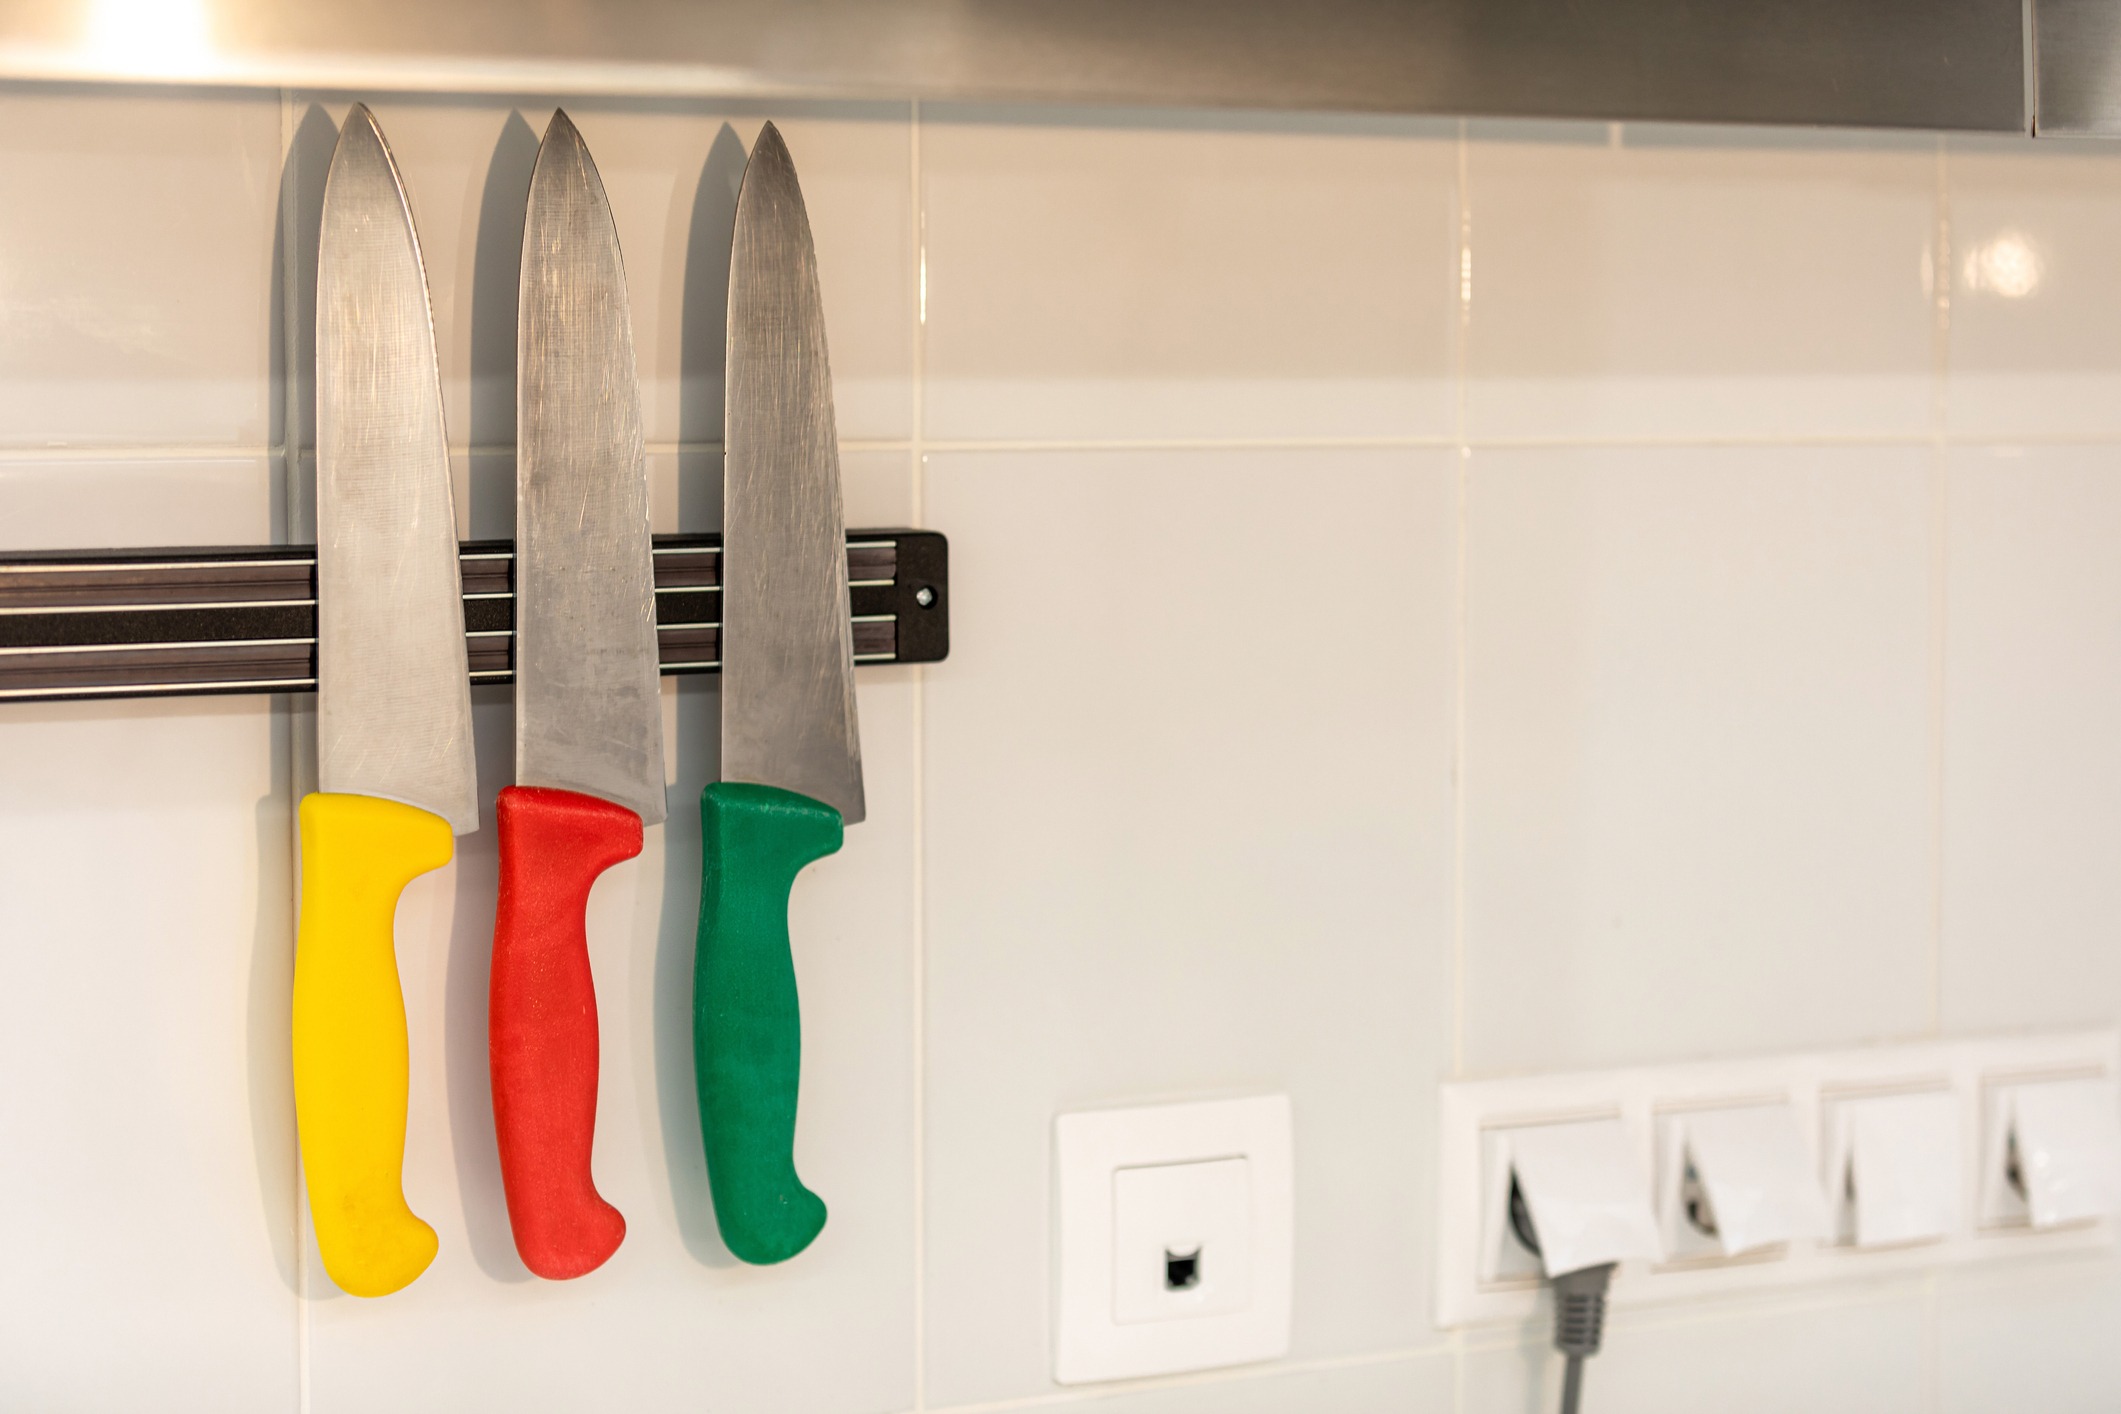 Set of three multi-colored kitchen knives on a magnetic strip on a white wall with electrical outlets Copy space